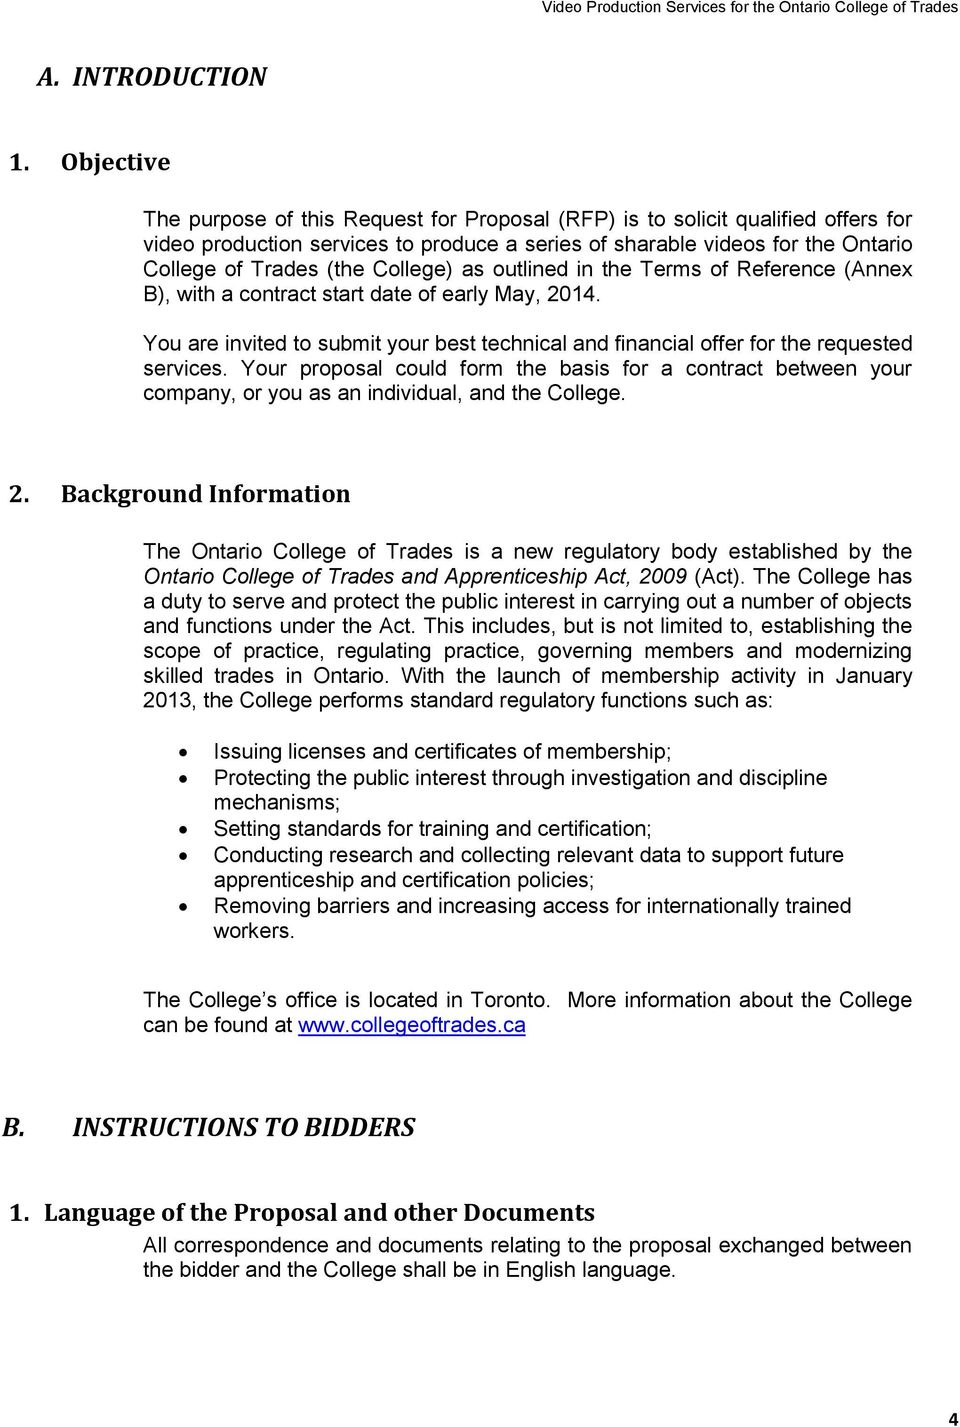 College) as outlined in the Terms of Reference (Annex B), with a contract start date of early May, 2014. You are invited to submit your best technical and financial offer for the requested services.